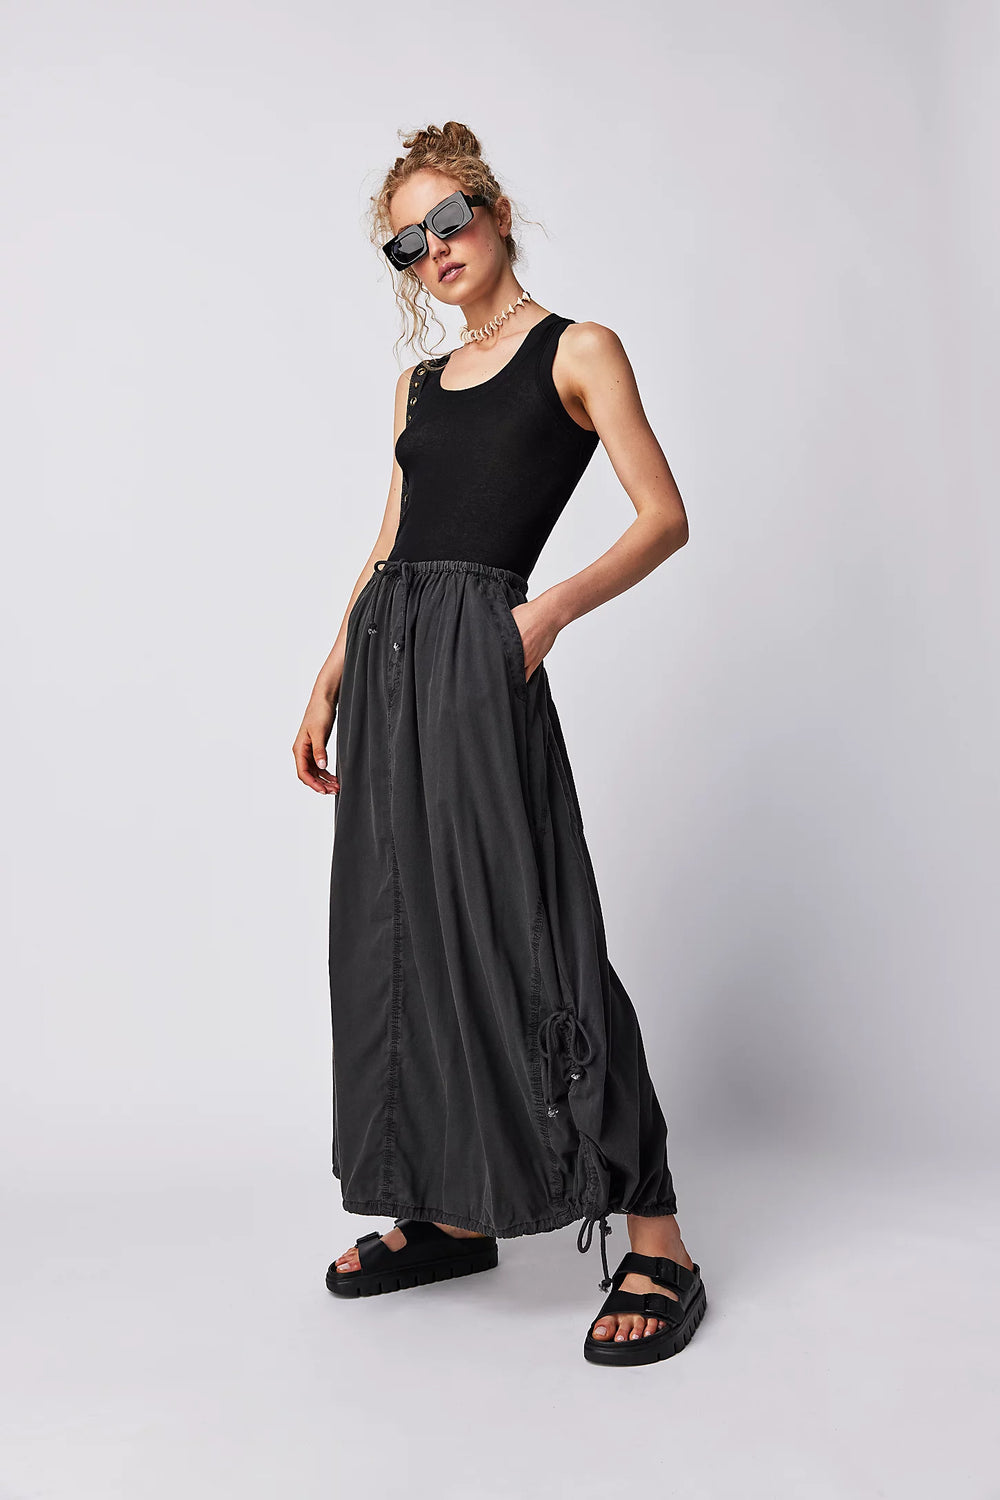 Free People Picture Perfect Parachute Maxi Skirt with drawstring